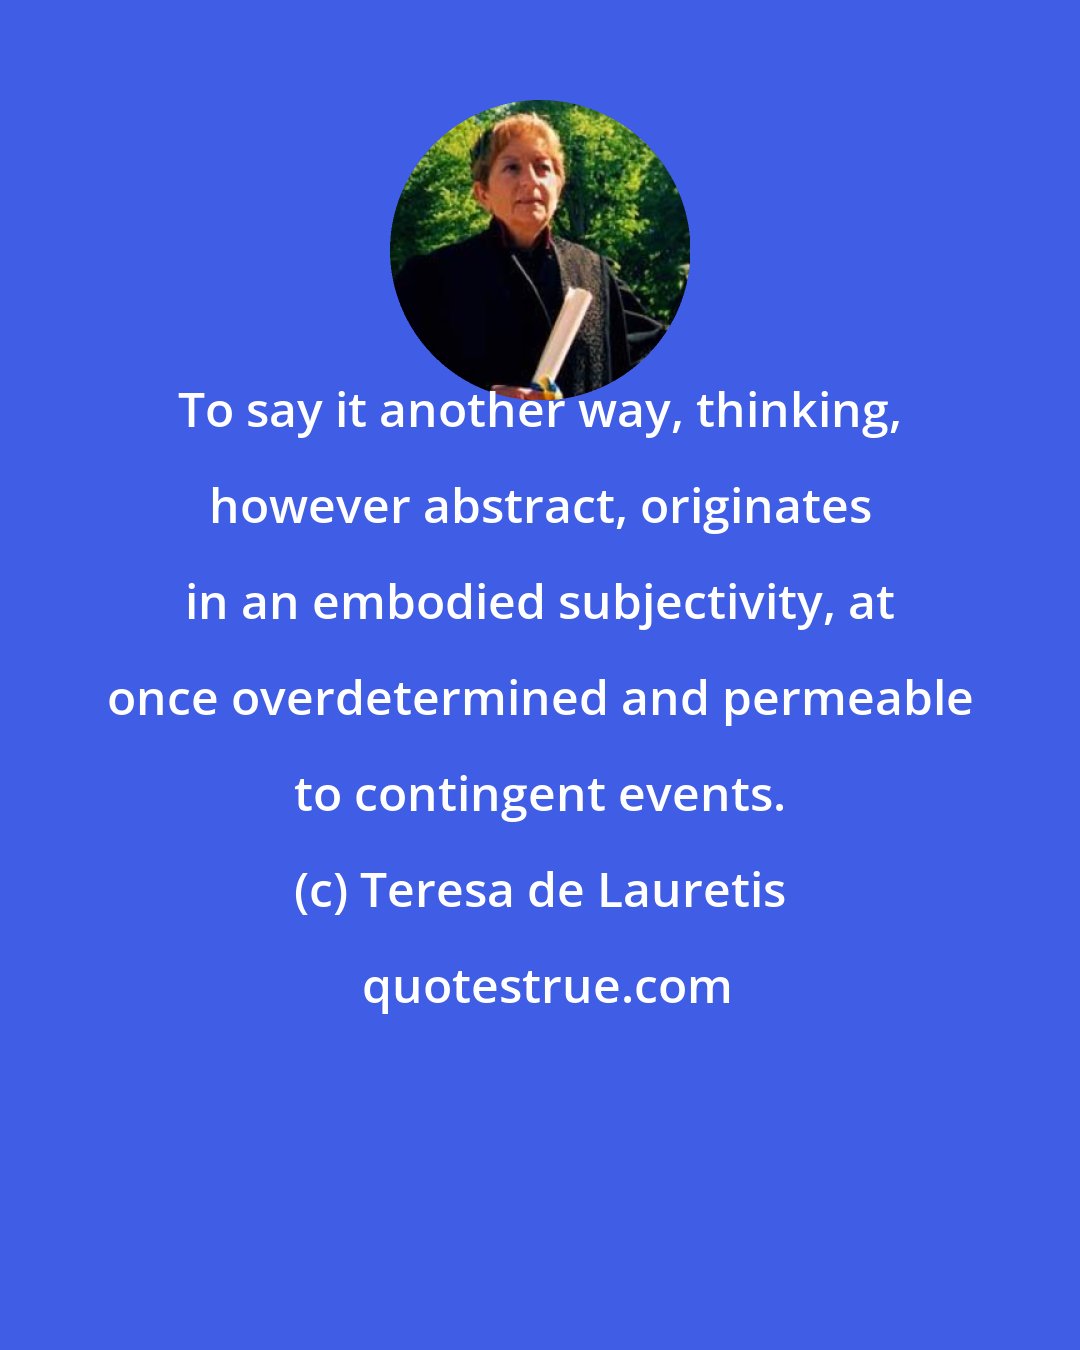 Teresa de Lauretis: To say it another way, thinking, however abstract, originates in an embodied subjectivity, at once overdetermined and permeable to contingent events.